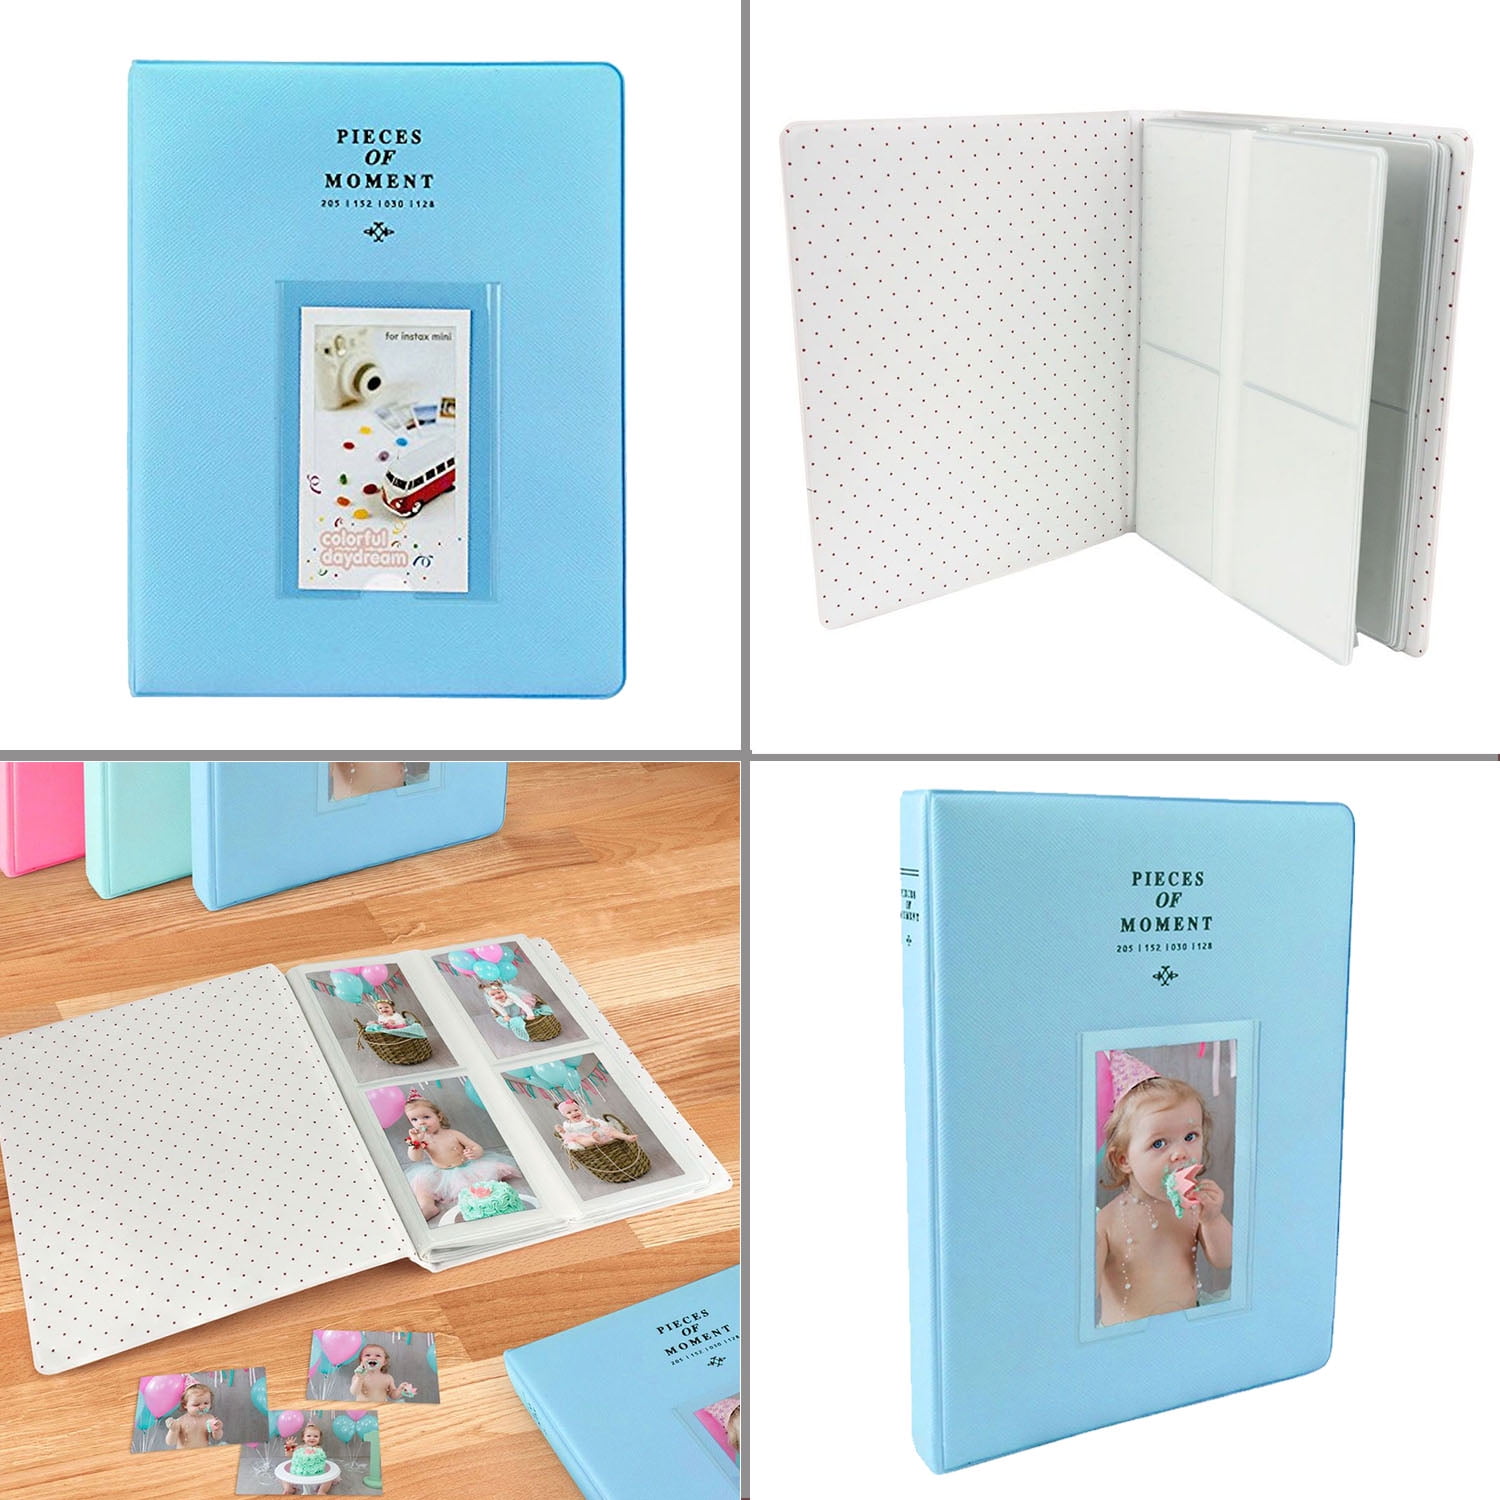  Hiwhy Mini Polaroid Photo Album 2x3 Inch 240 Pockets Photo Book  for Fujifilm Instax Mini Camera DIY Collector with 30 Removal Inner Pages,  Pink : Home & Kitchen